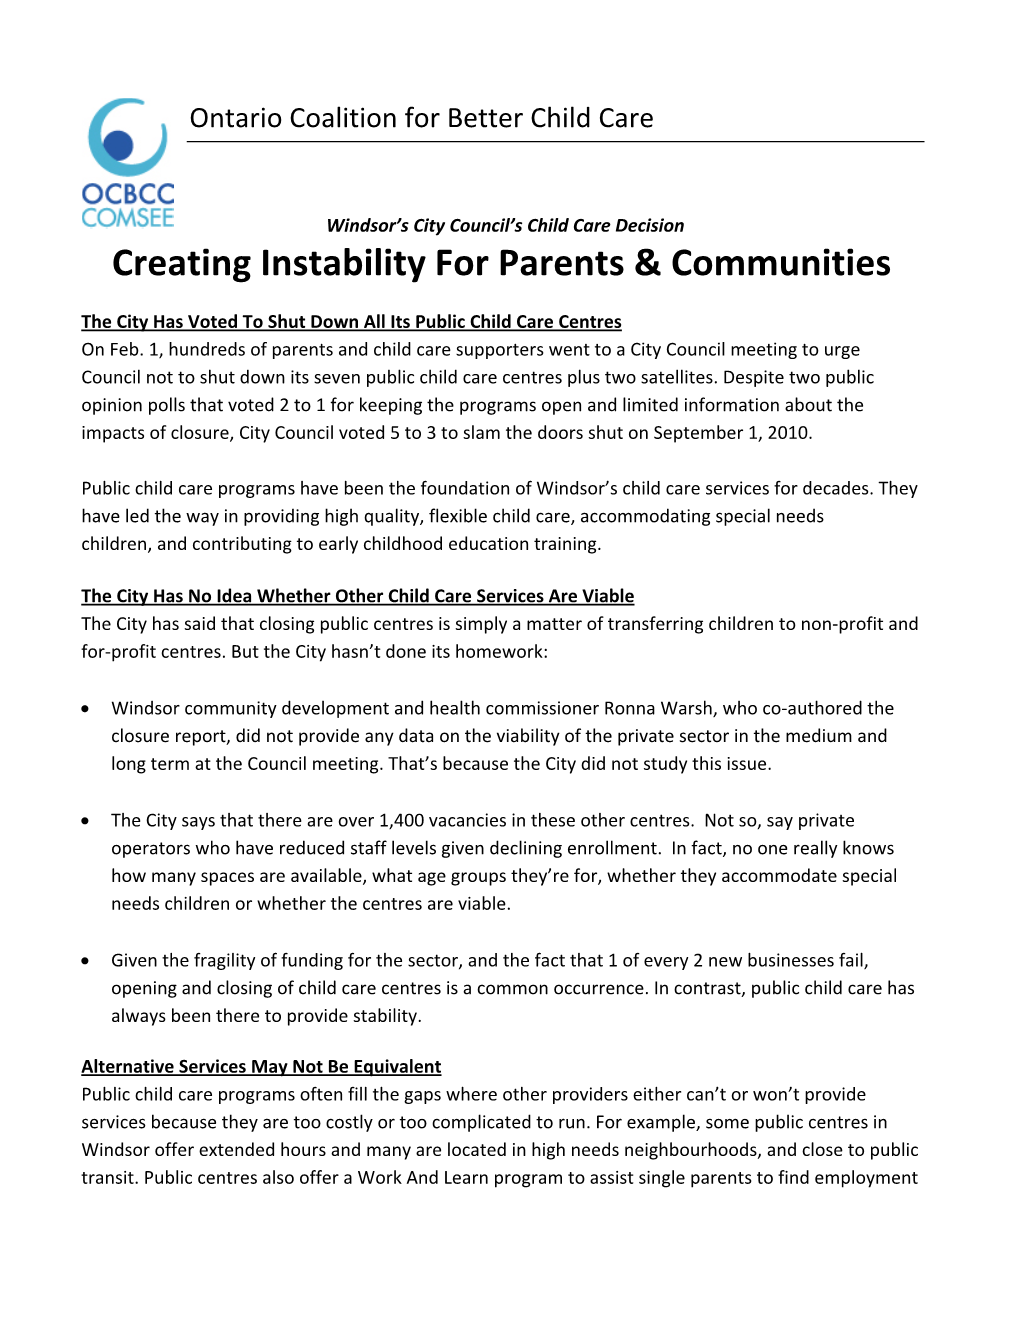 Creating Instability for Parents & Communities